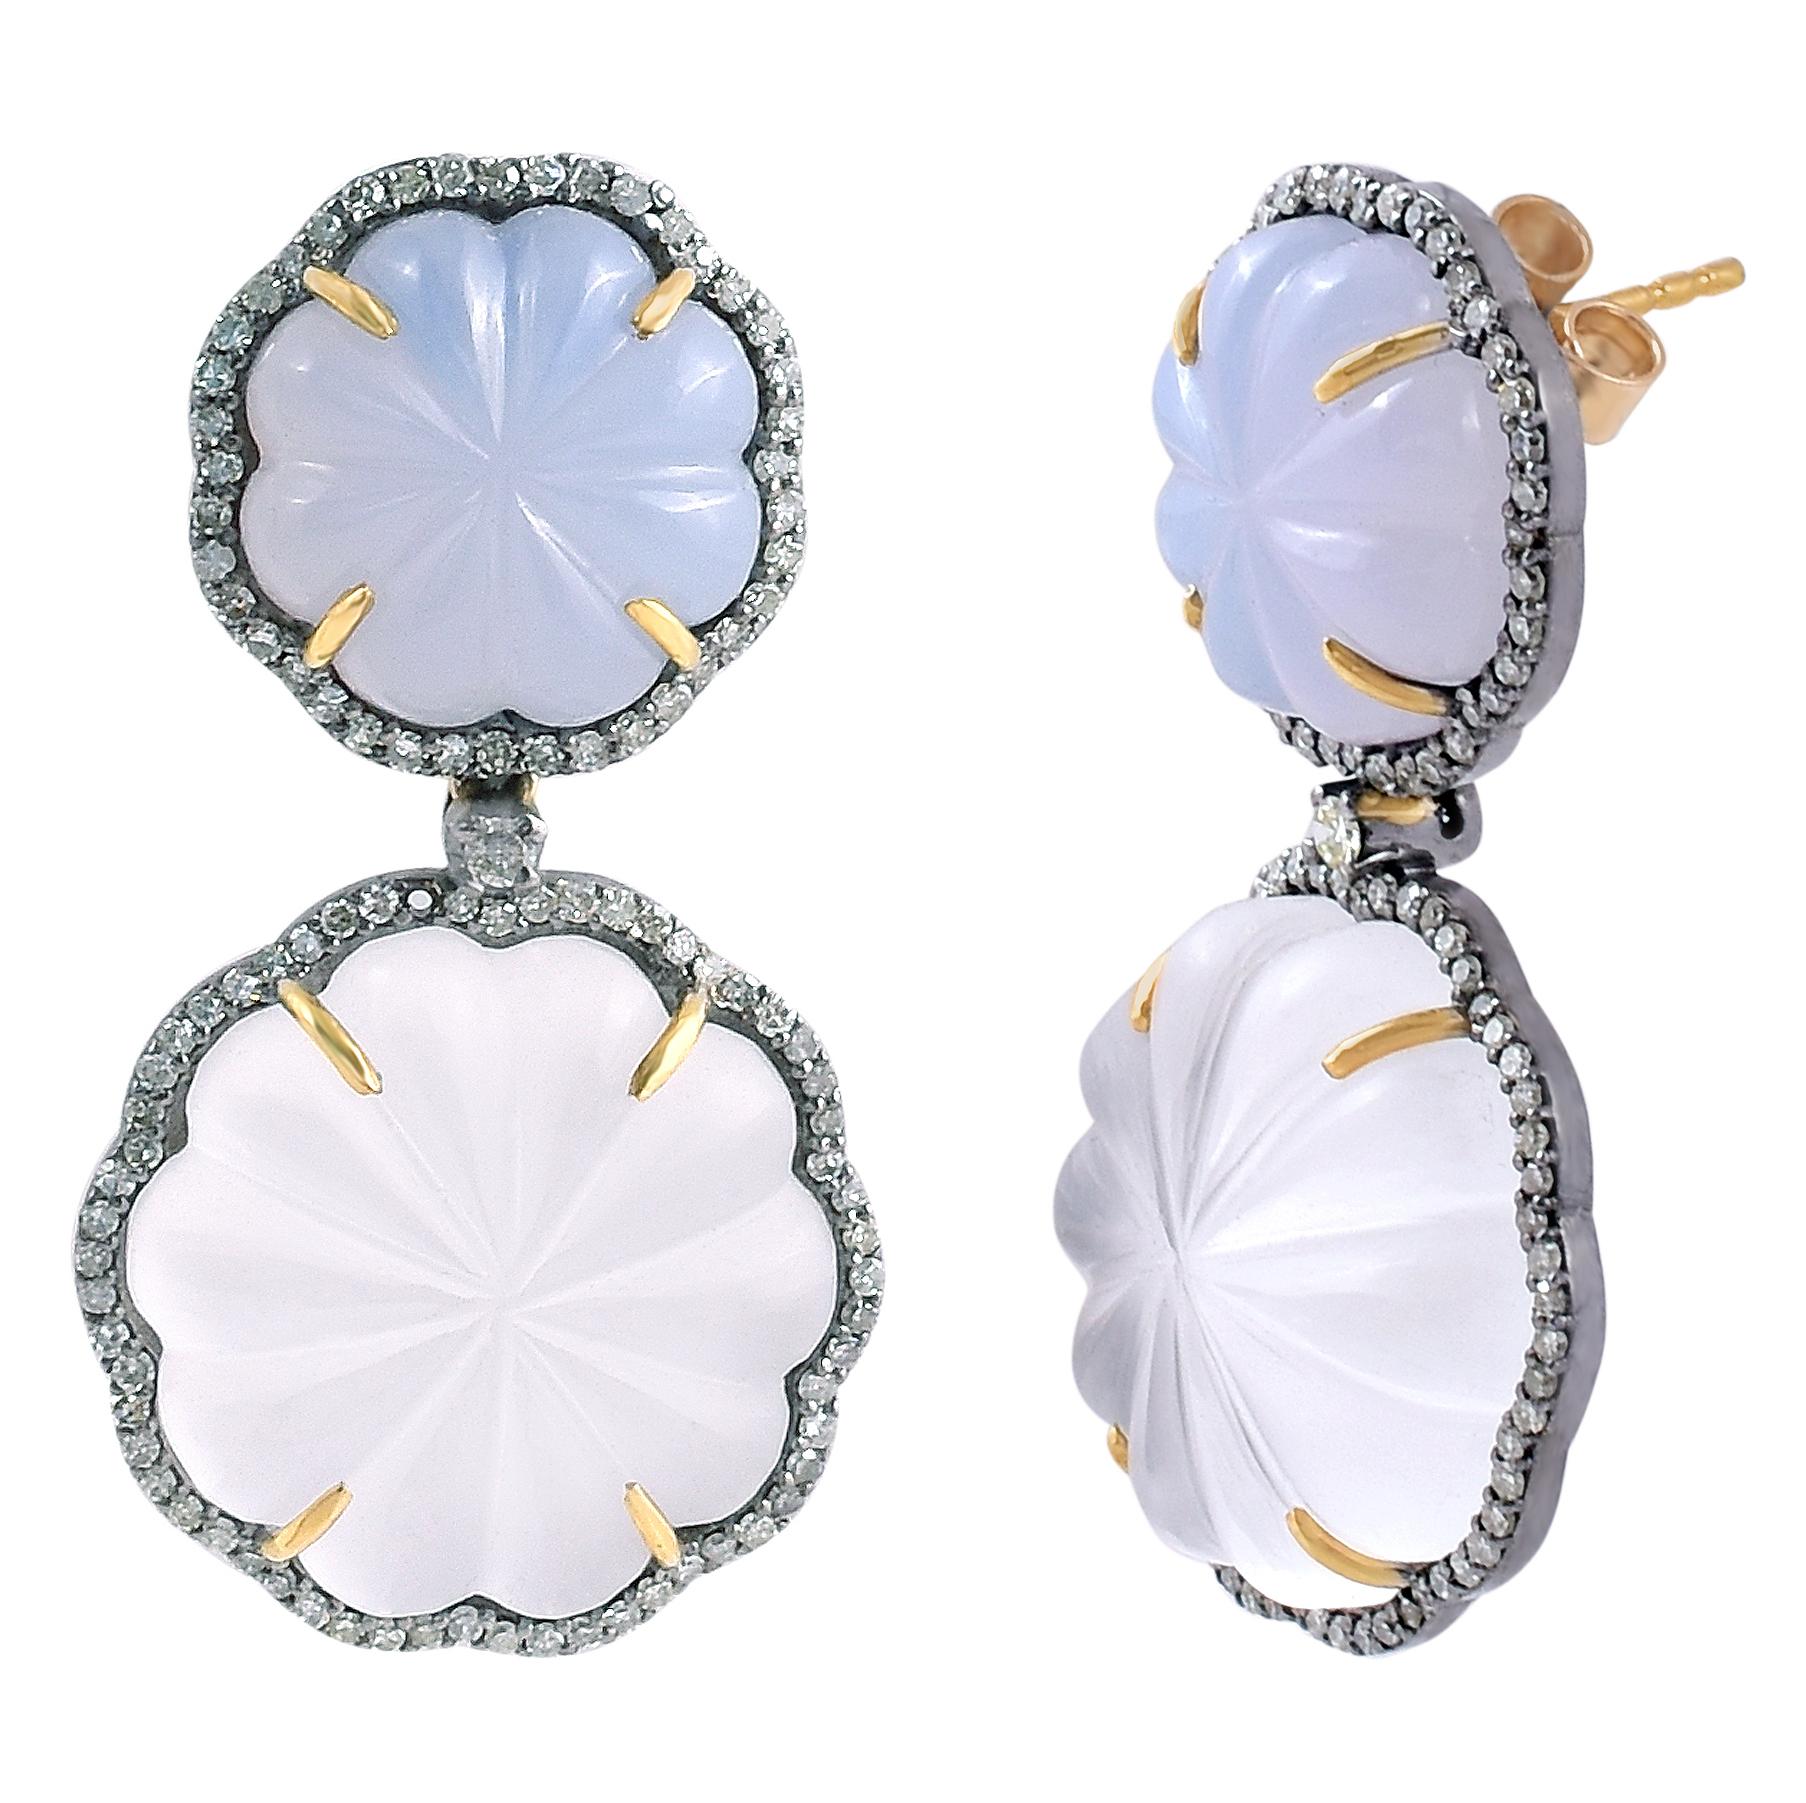 44.11 Carat Blue Chalcedony, Crystal, and Diamond Carved Drop Earrings in Contemporary Victorian Style

This art-deco style timeless crystal and chalcedony with diamond cluster earring is fantastic. The solitaire floral petal carved matt finished